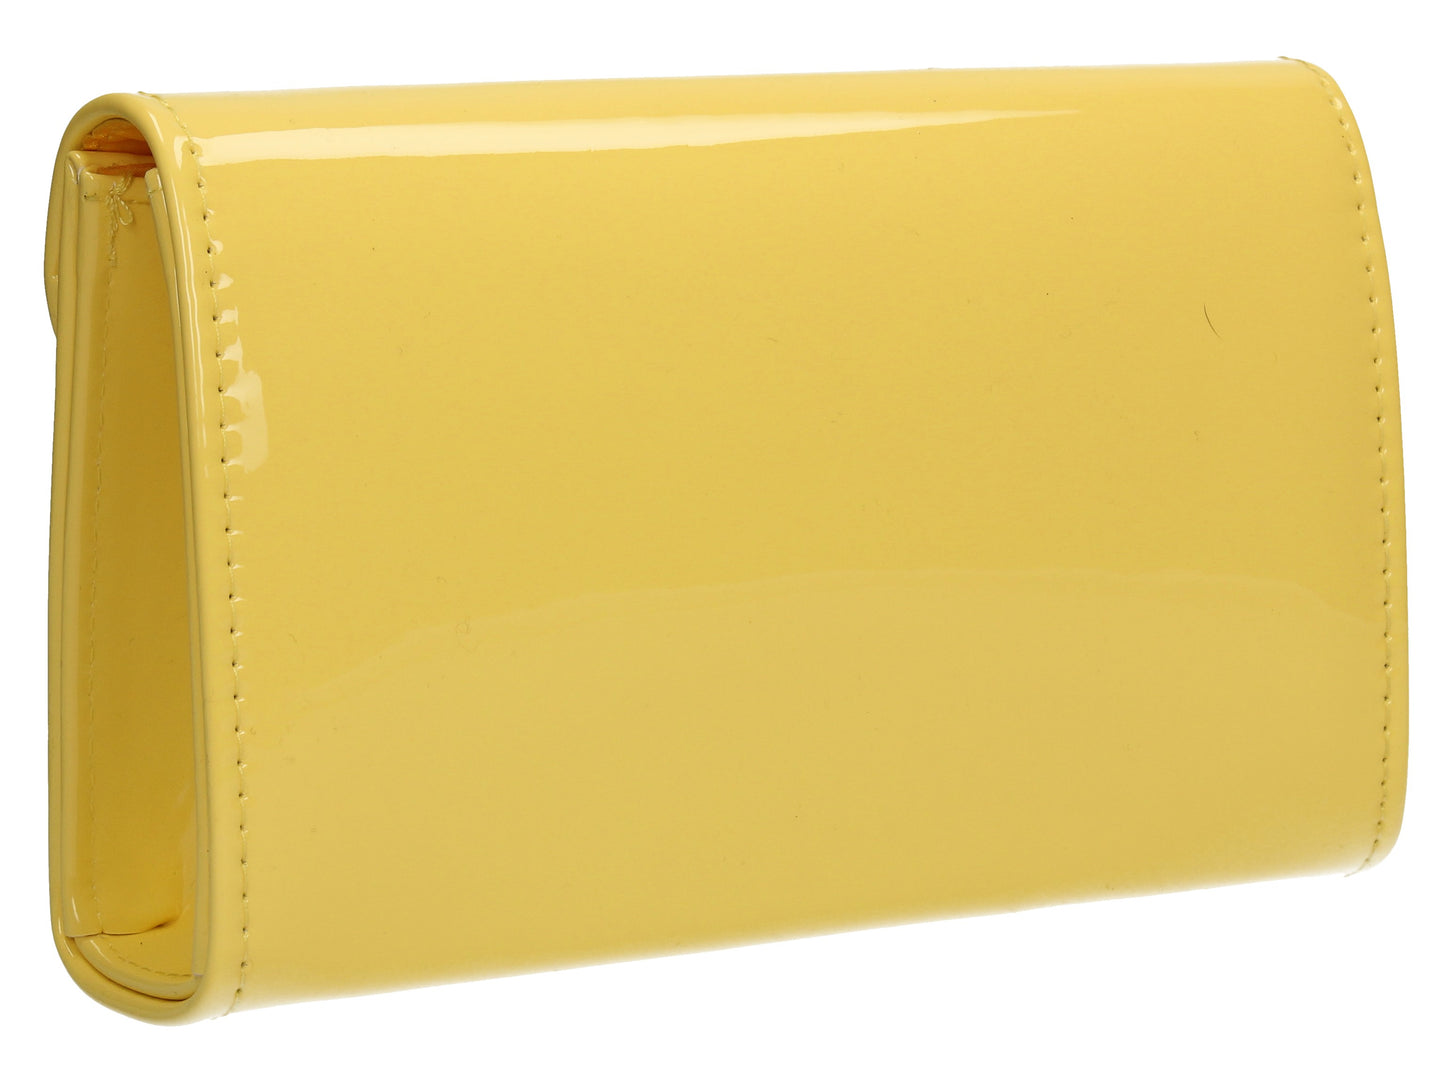 SWANKYSWANS Wendy V Patent Clutch Bag Yellow Cute Cheap Clutch Bag For Weddings School and Work